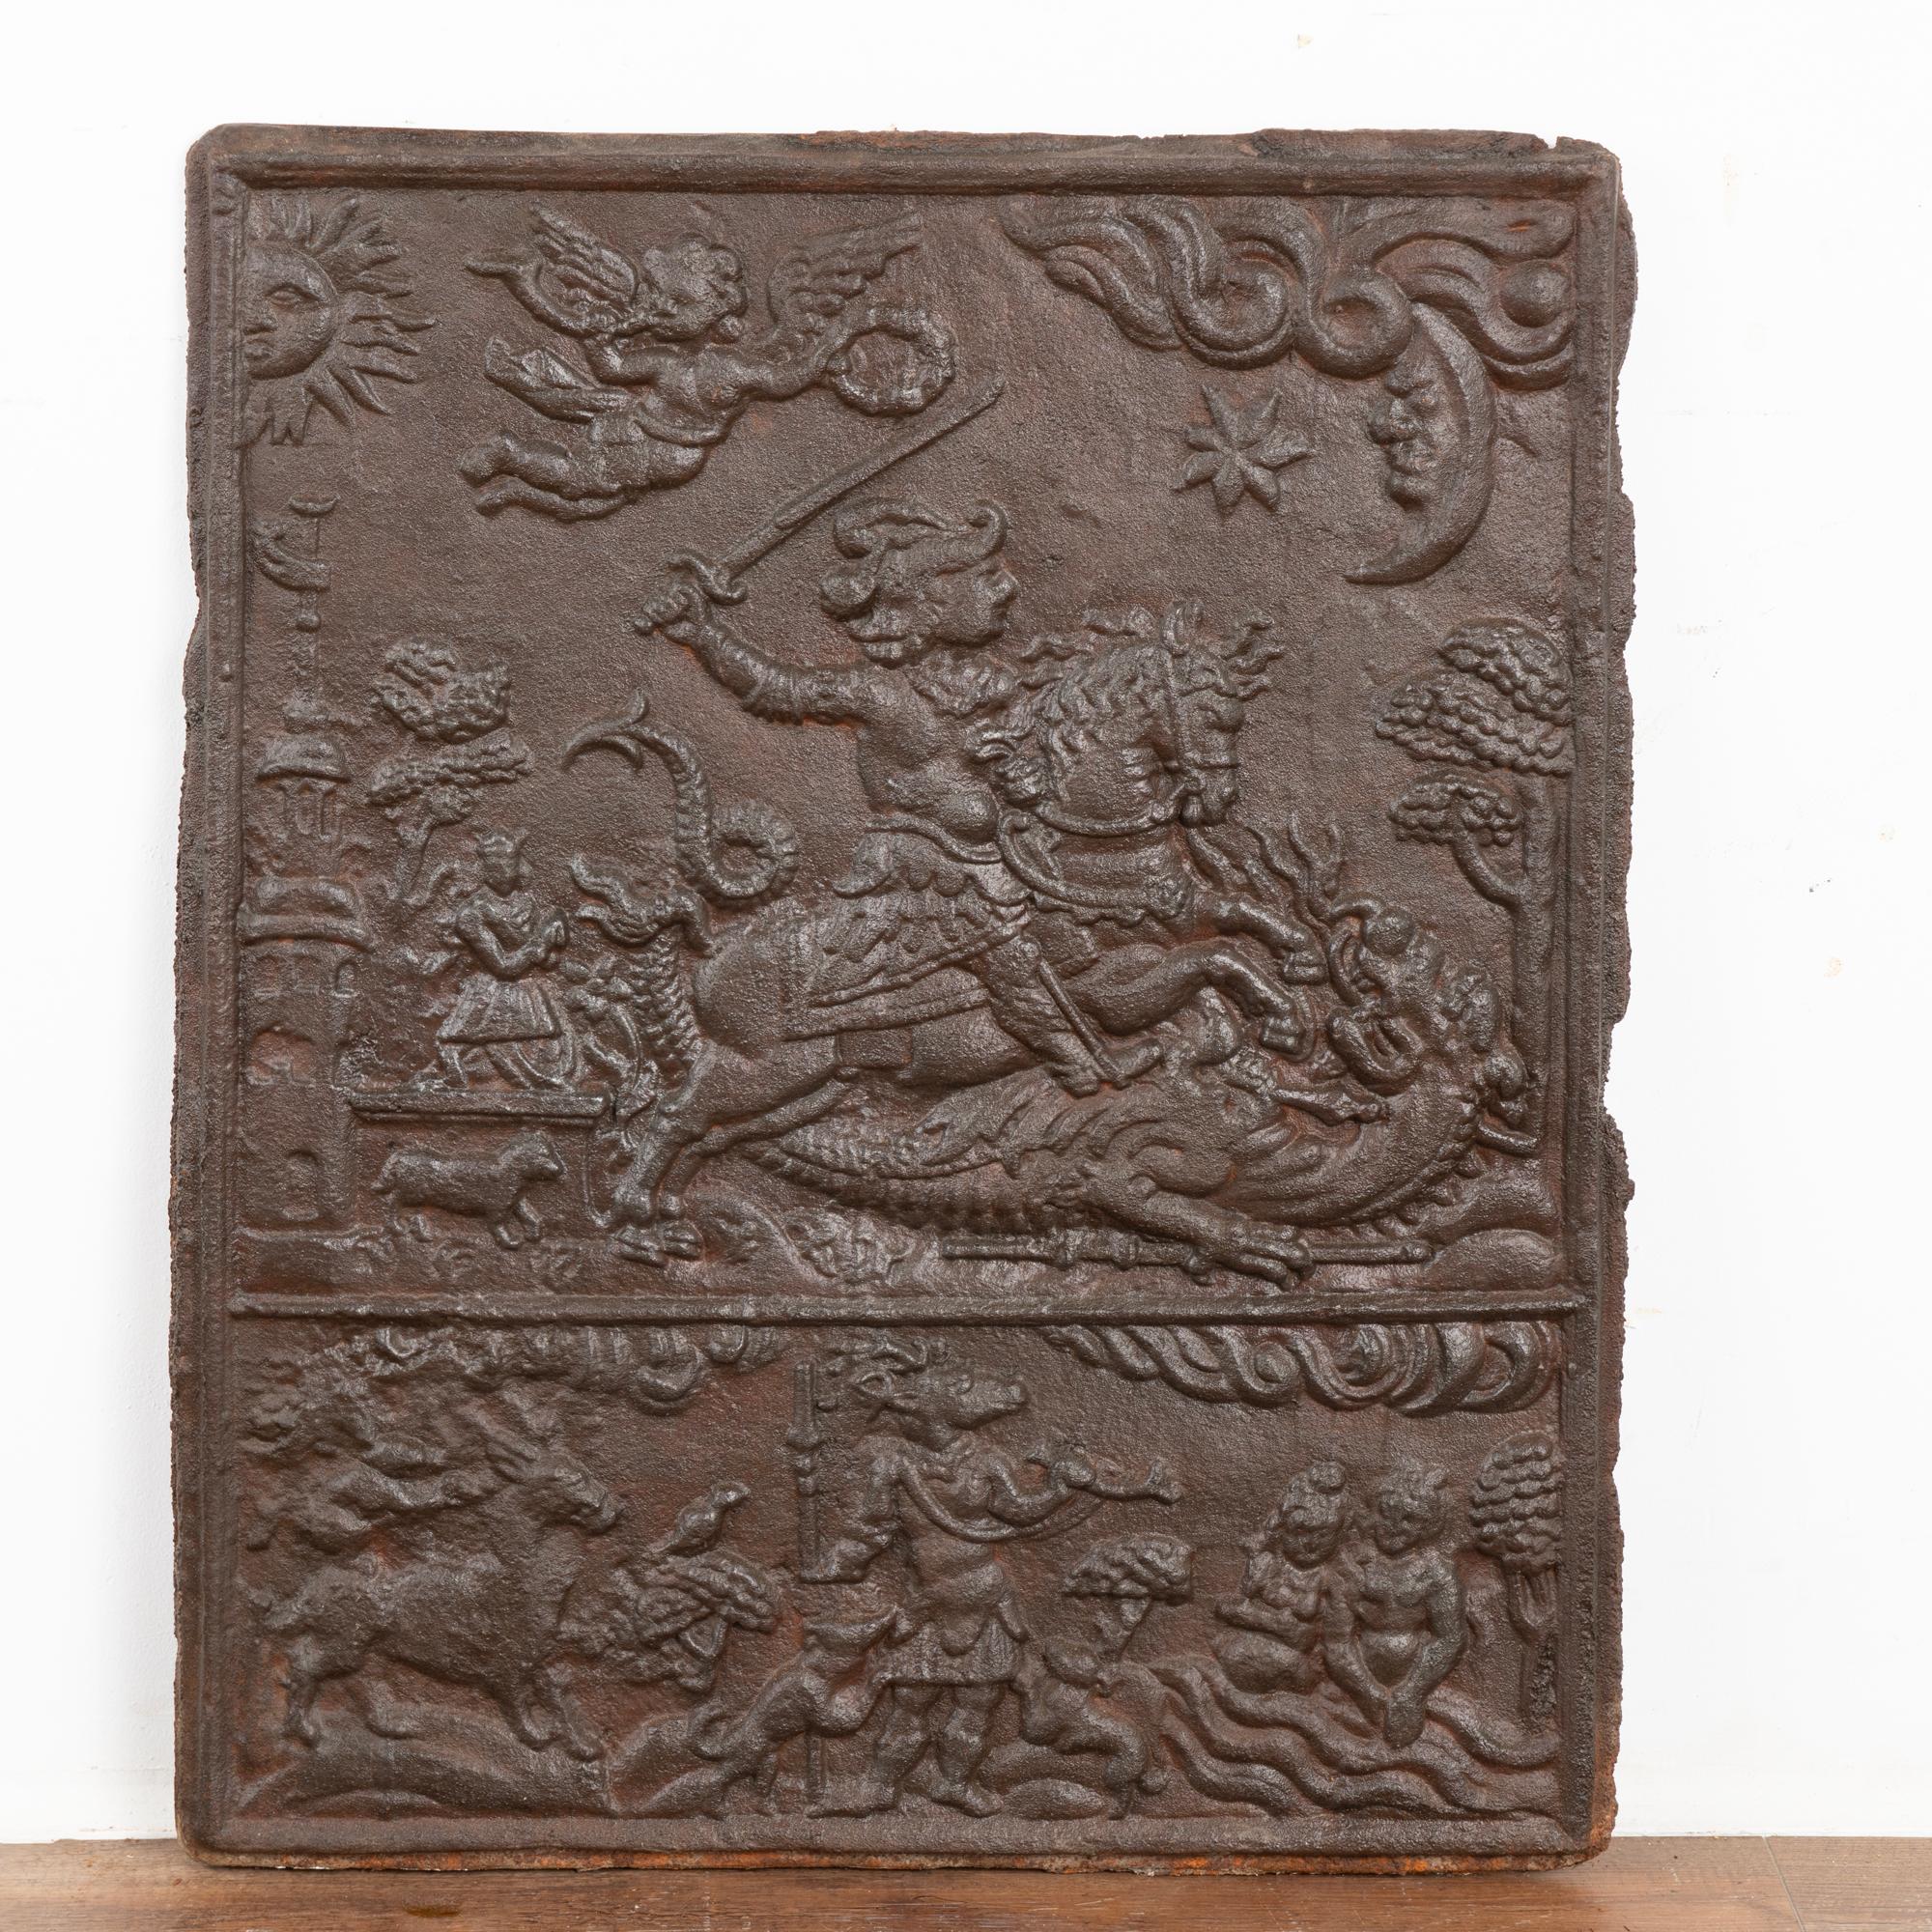 Cast iron fire back with soldier wielding sword on horseback and cherub with trumpet.
All scratches, dings, abrasions, worn figures, rust are reflective of age and do not detract from this decorative cast iron fire back.
Please refer to professional